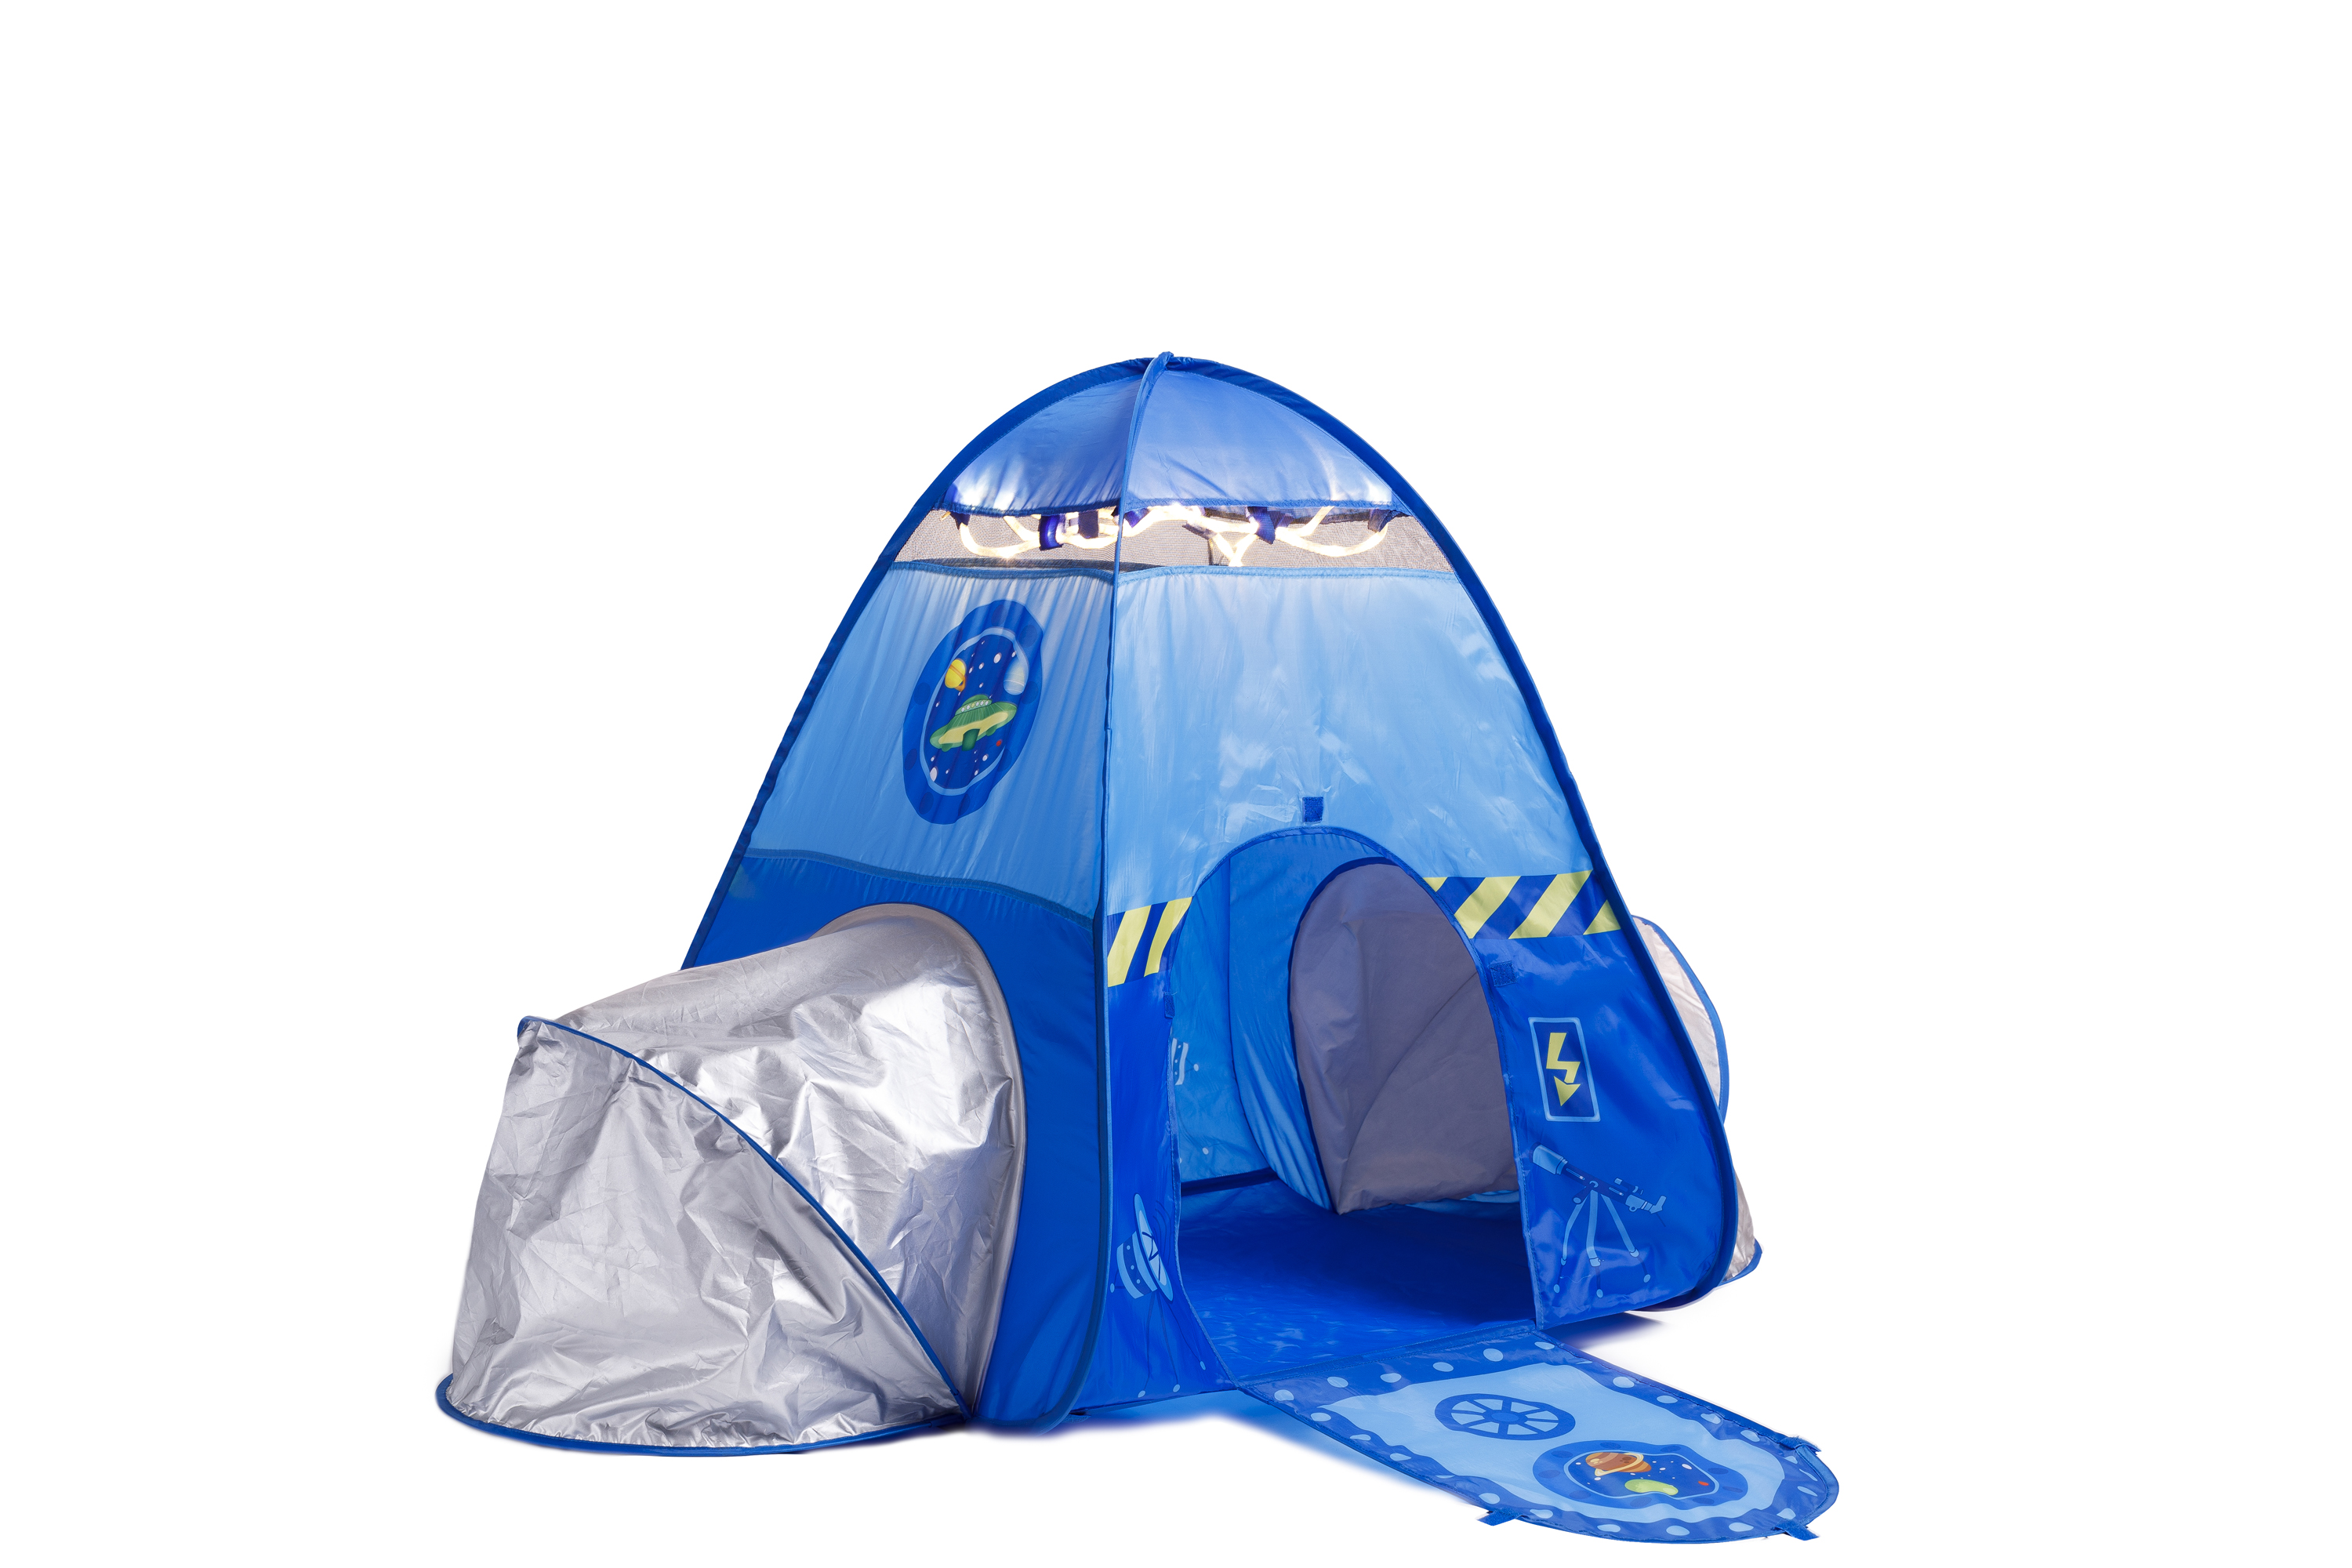 Fun2Give Pop-It-Up Rocket Play Tent w/ Lights - image 2 of 2